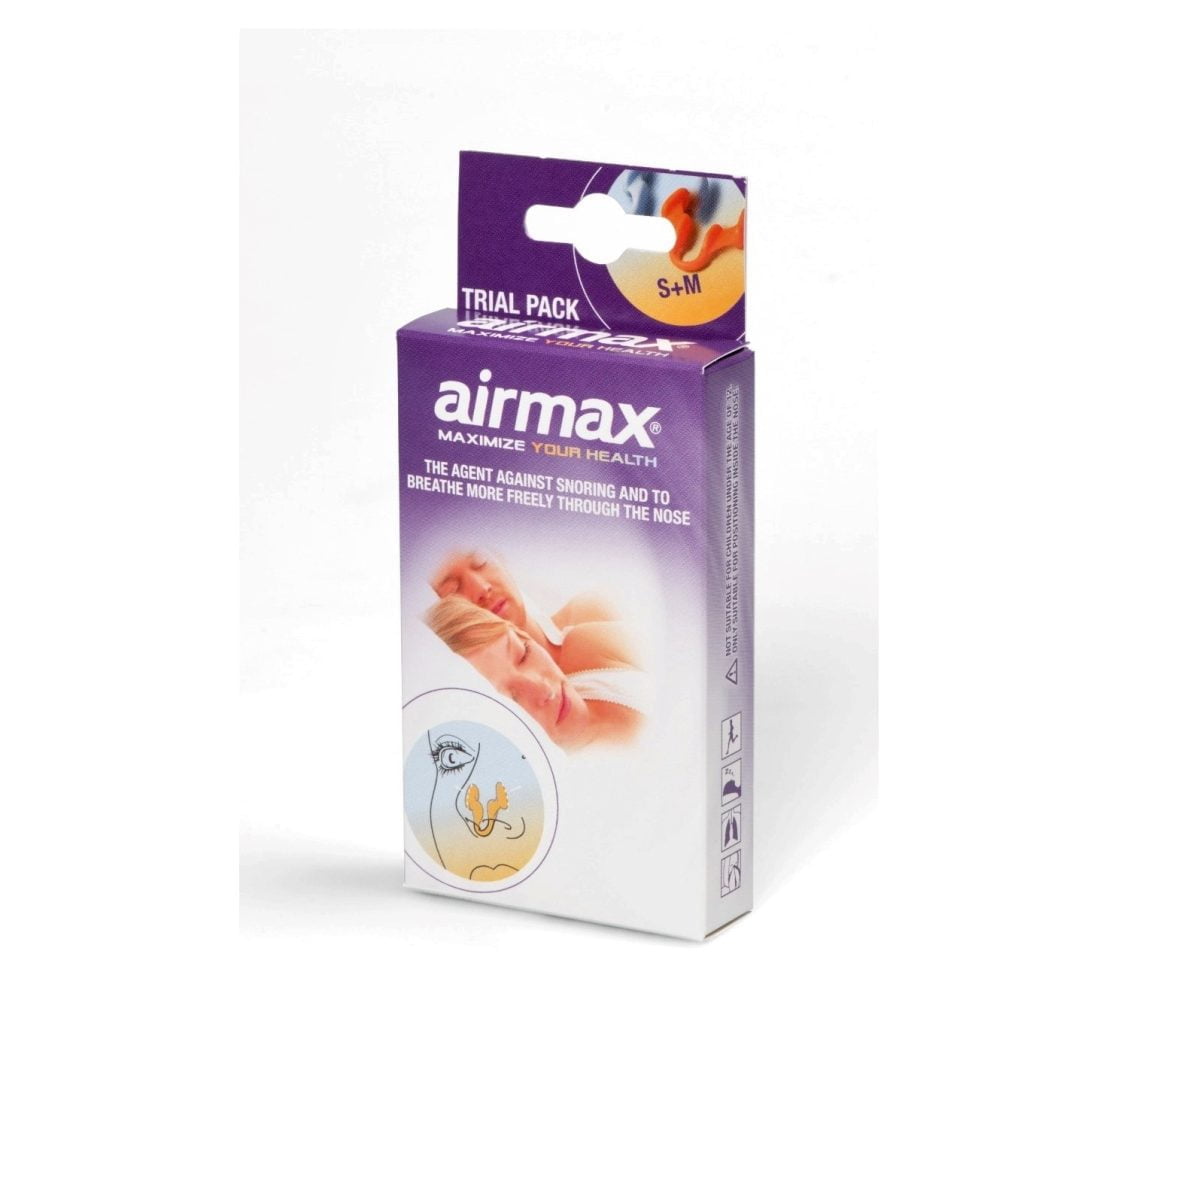 D99B29Bf 7282 4175 9697 53Eb7Fa34E74 Airmax &Lt;H1&Gt;Airmax Nasal Dilator (Small + Medium)&Lt;/H1&Gt; Https://Www.youtube.com/Watch?V=2W8Igra27O0 &Lt;P Data-Reactid=&Quot;362&Quot;&Gt;Airmax Nasal Dilator Will Improve Your Nasal Airflow Significantly And Help You Breath Better, The Airmax Is A Well-Developed Product In The Field Of Nasal Dilators. The Shape Of The Airmax Has Been Developed By Airflow Experts And Its Positive Effects Have Been Tested And Proven By Ent Doctors. Airmax Nasal Dilator Has Successfully Been Used In Multiple Clinical Studies Over The Last Years.&Lt;/P&Gt; Airmax Nasal Airmax Nasal Dilator – Small+Medium